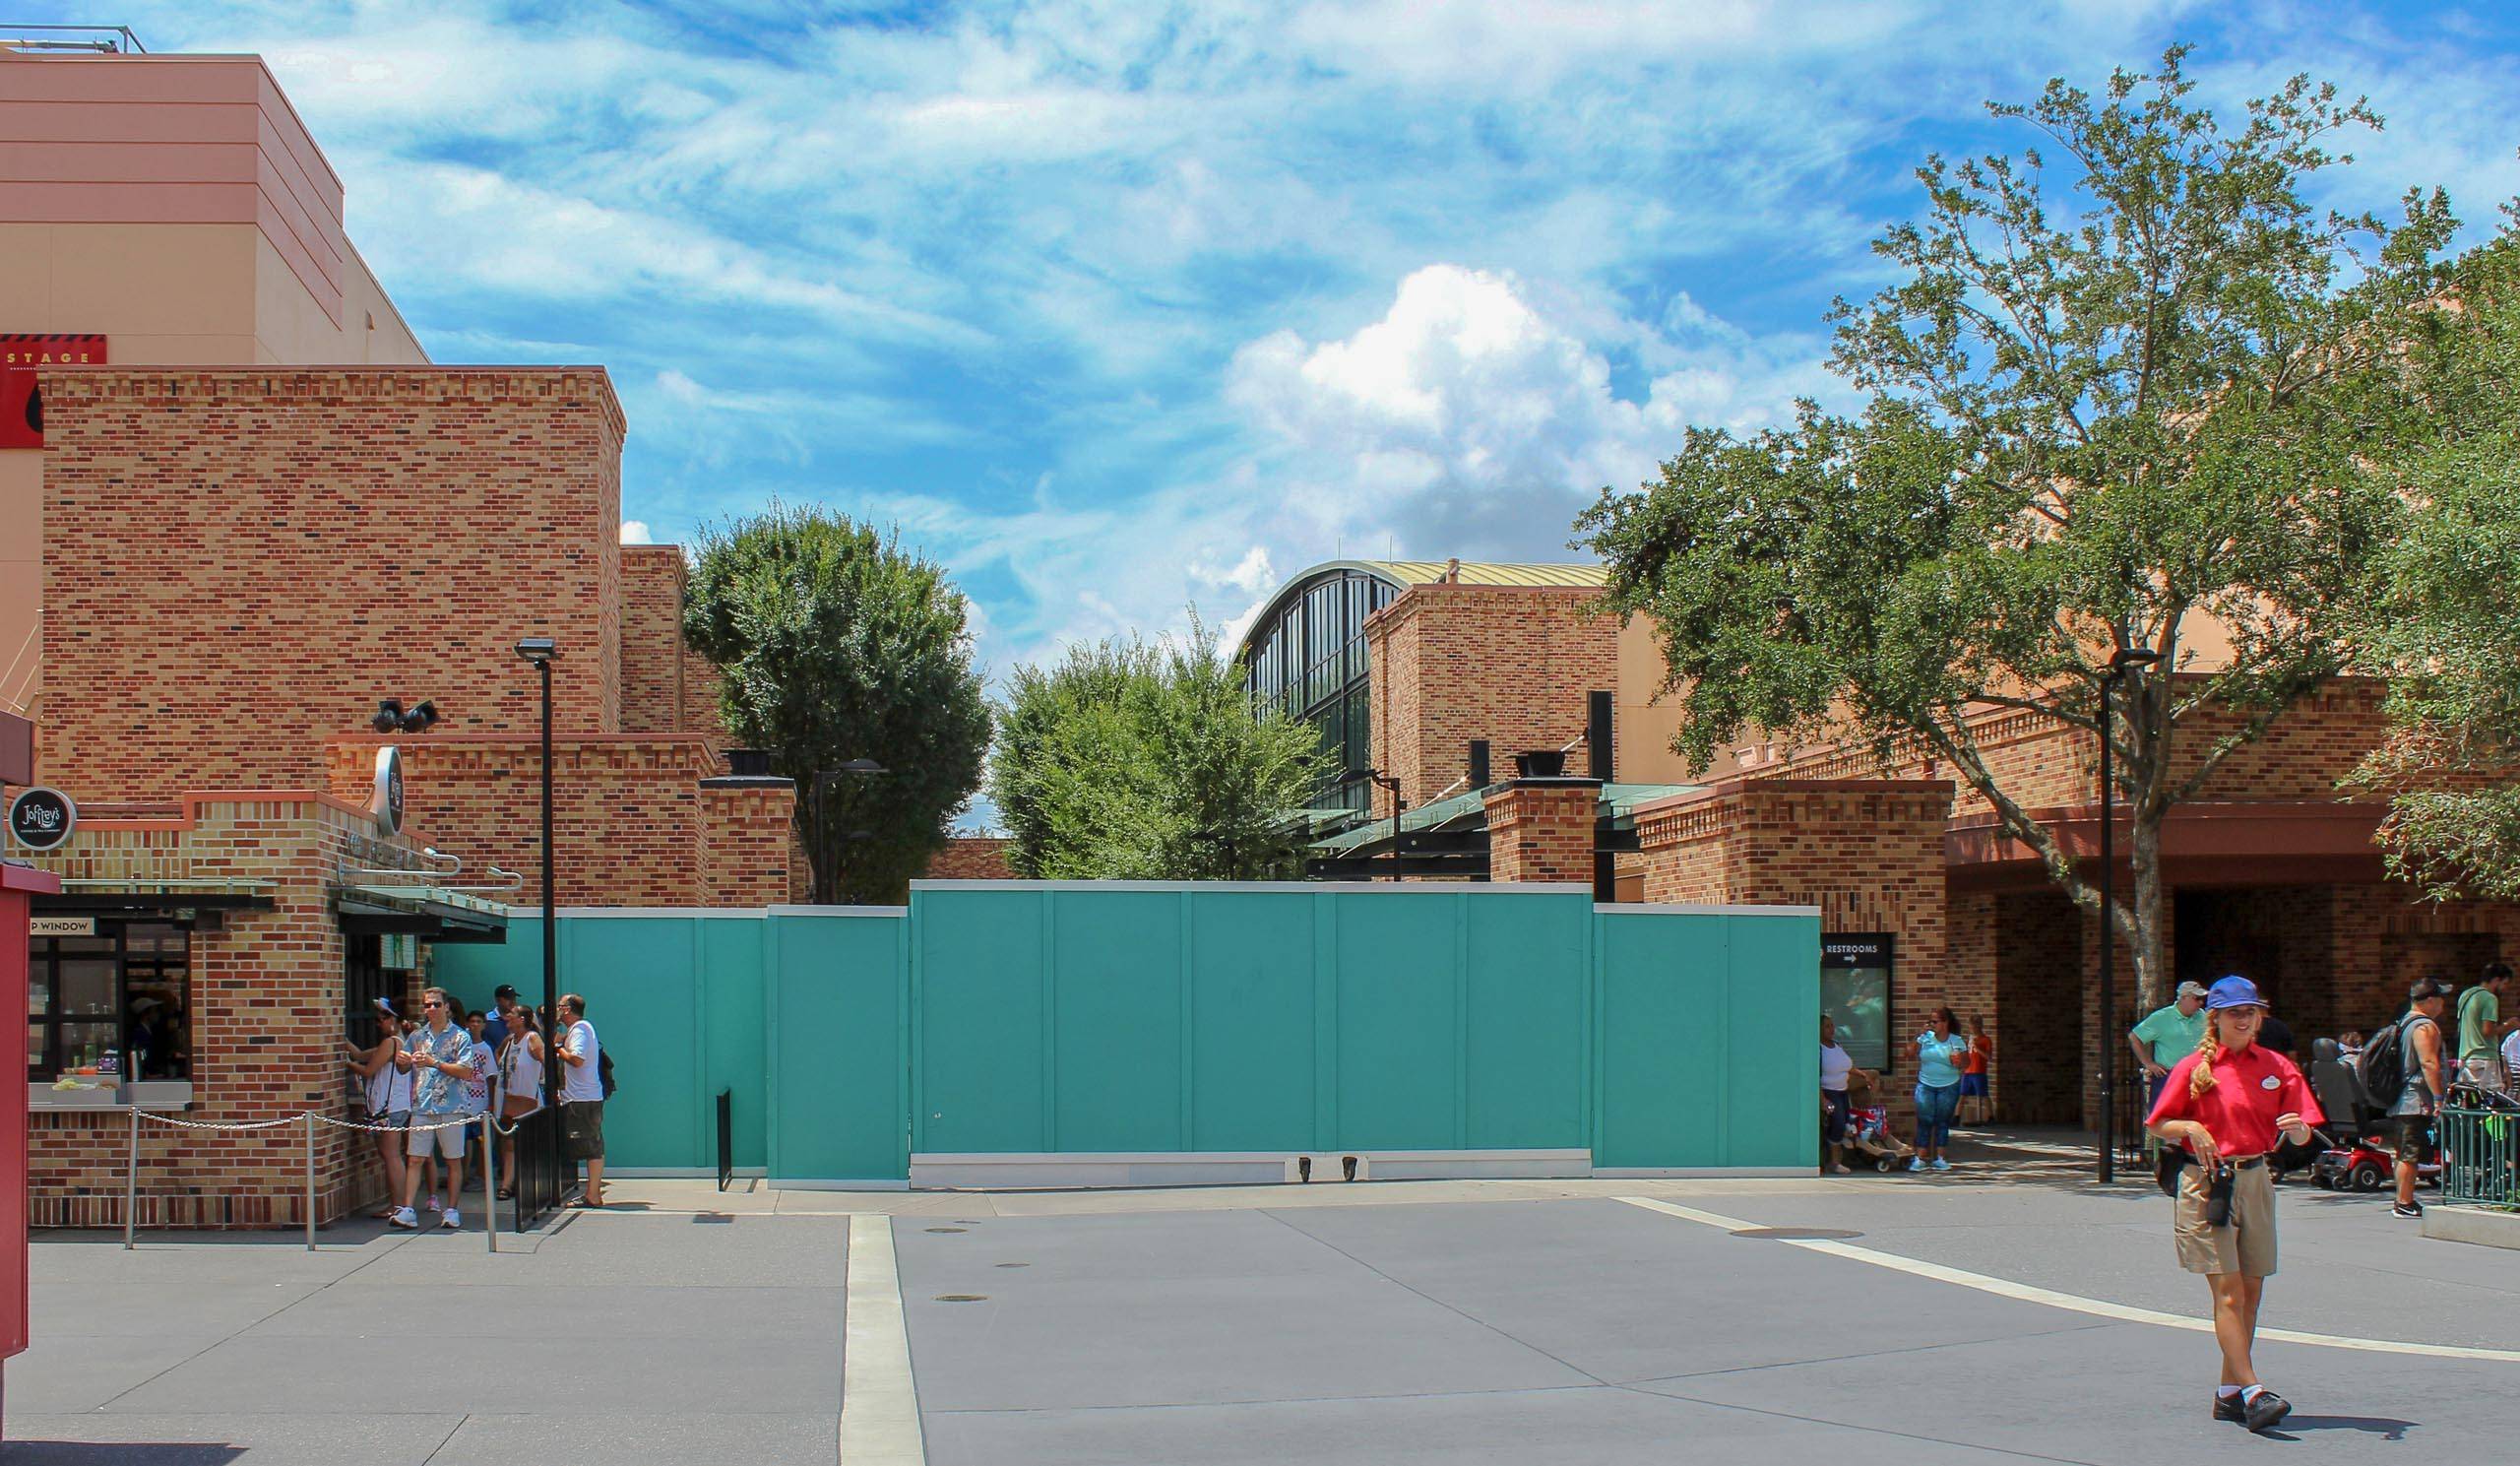 PHOTO - Pixar Place now closed to guests and walled-off